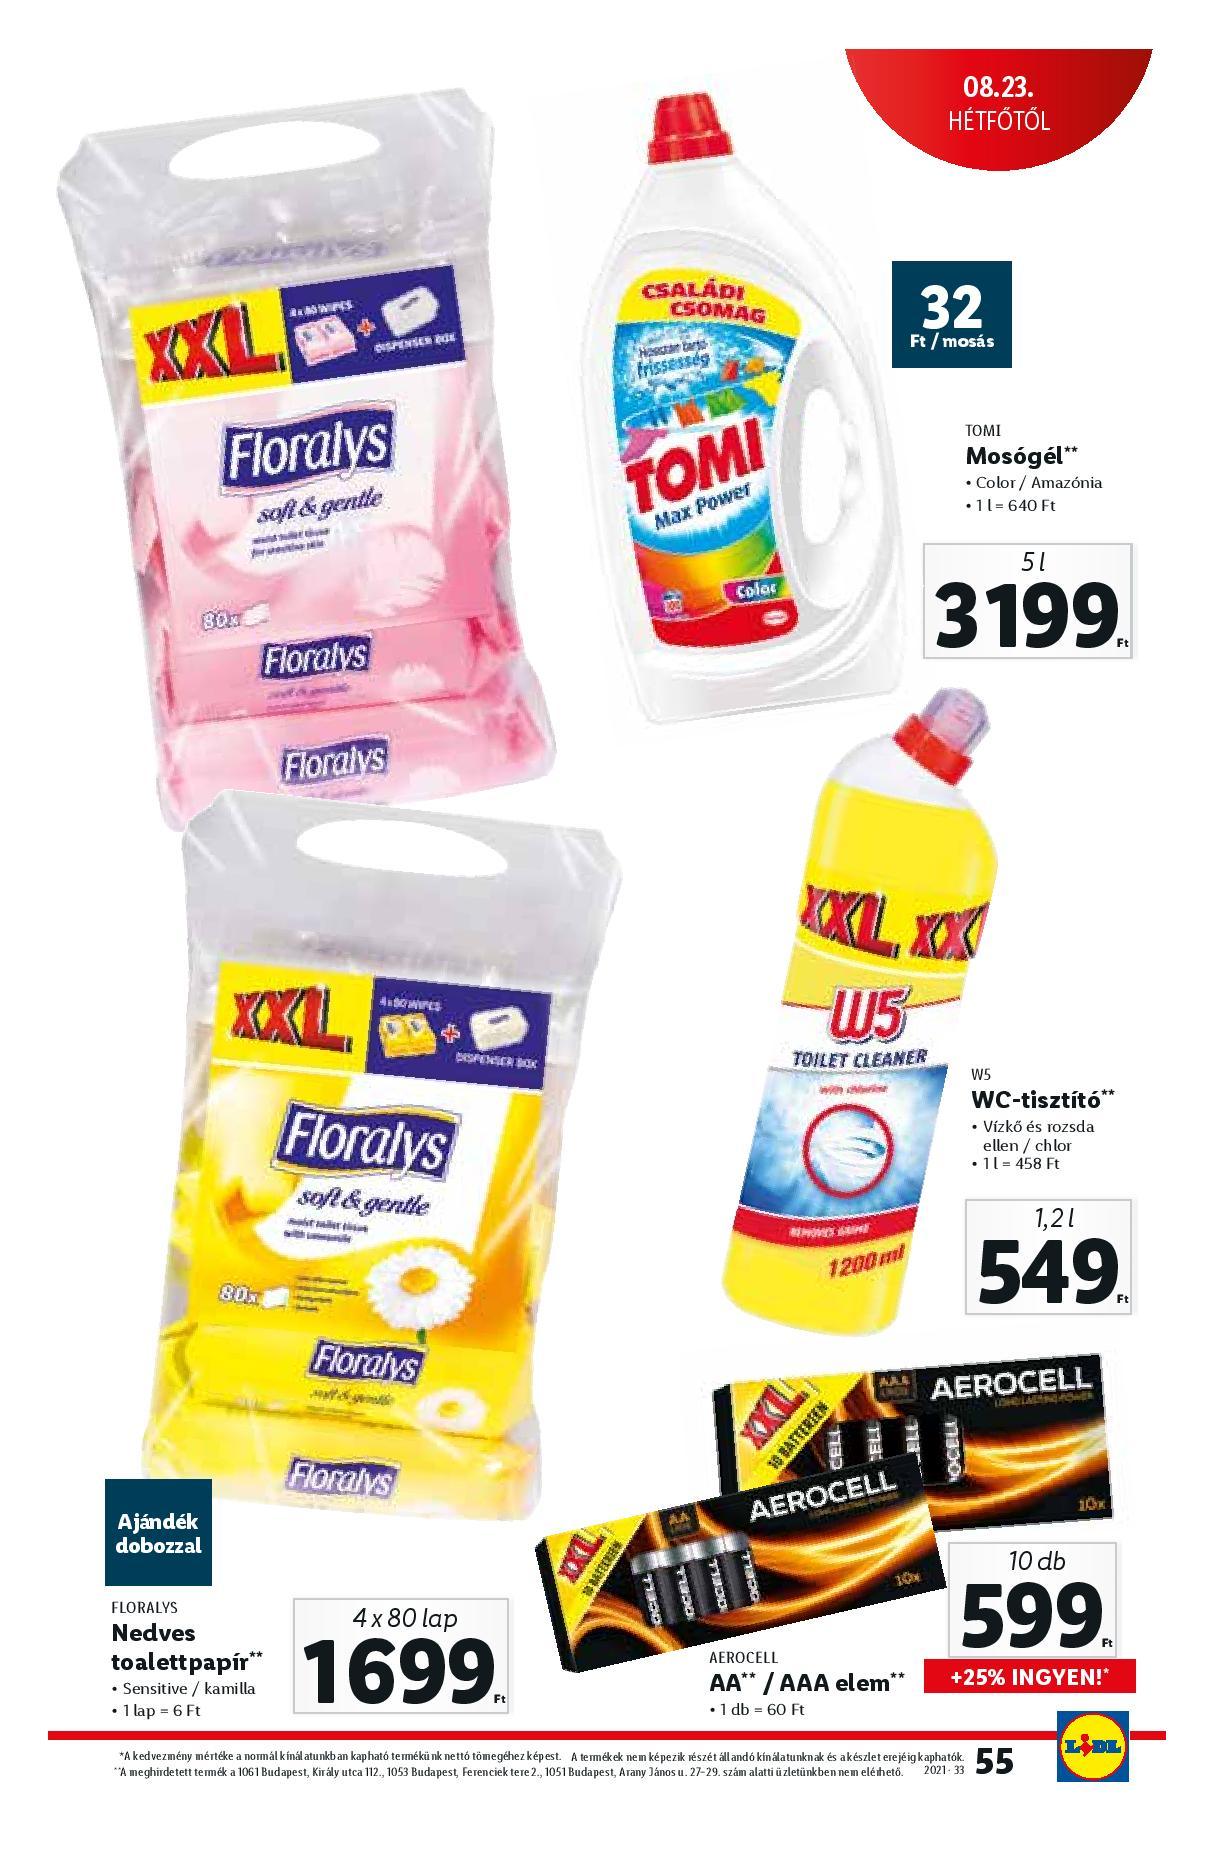 lidl0819-25-page-055